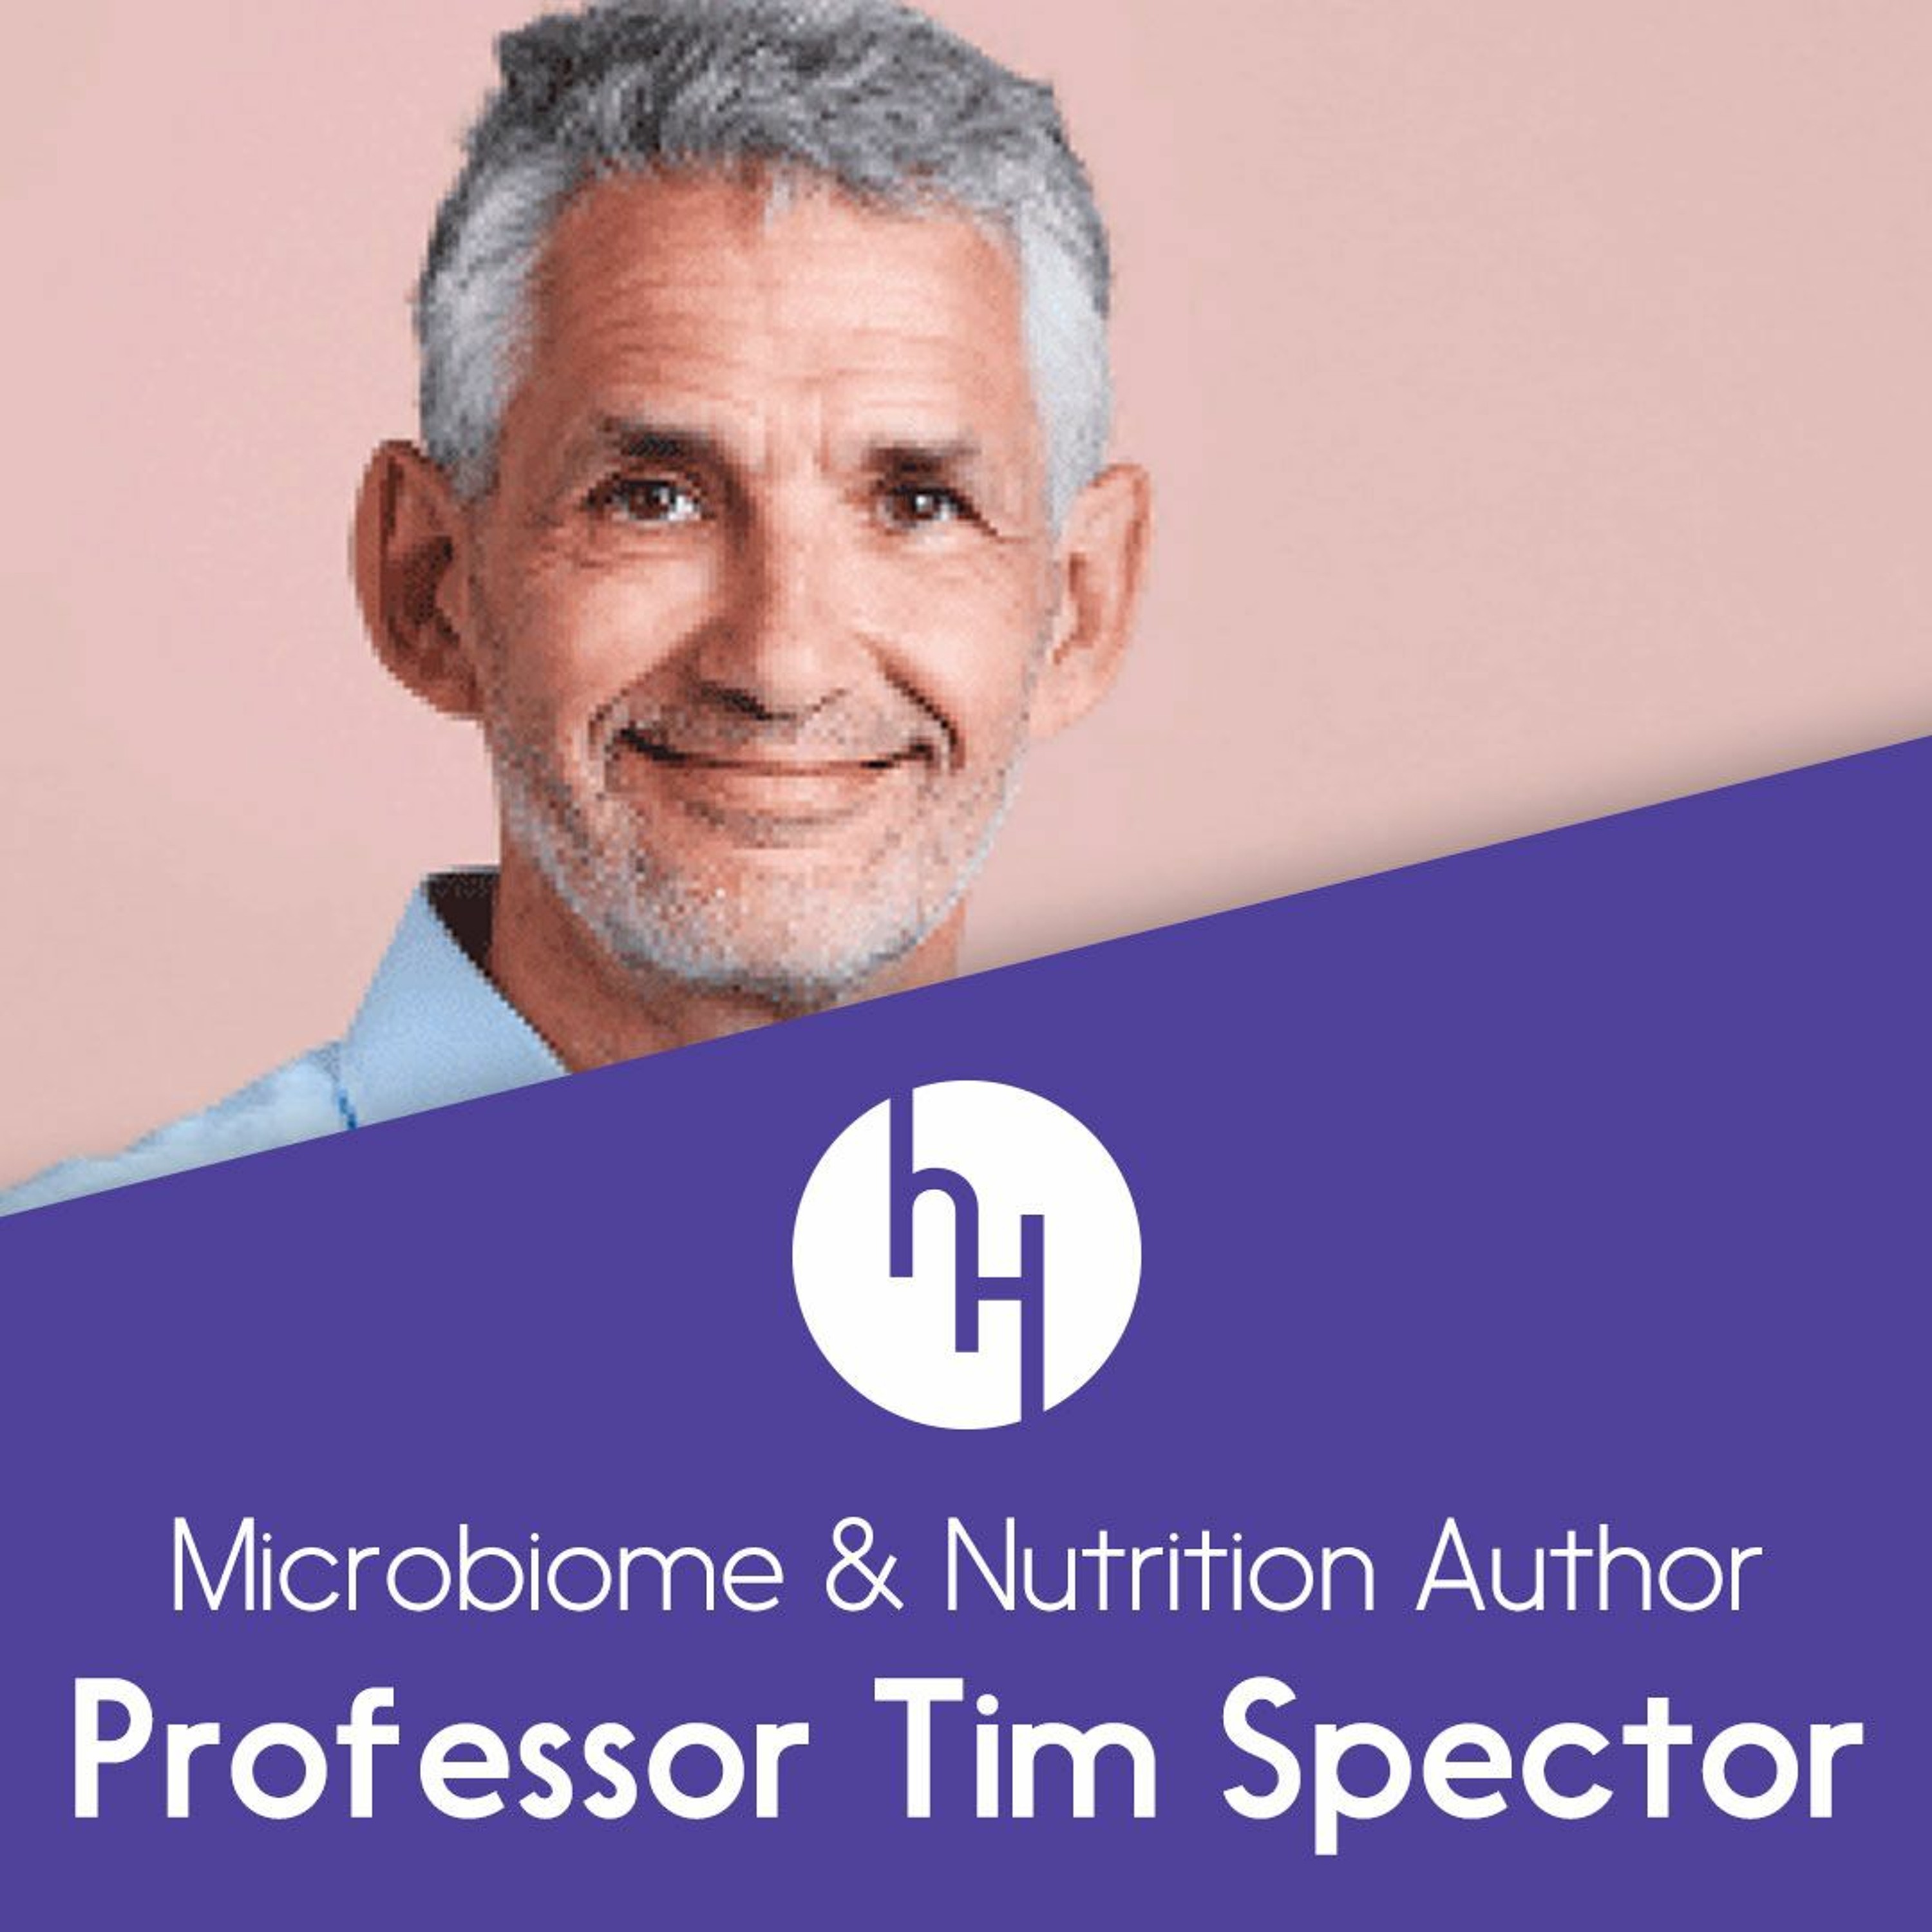 Ep 57 with Professor Tim Spector on ‘Why Almost Everything We’ve Been Told About Food is Wrong’